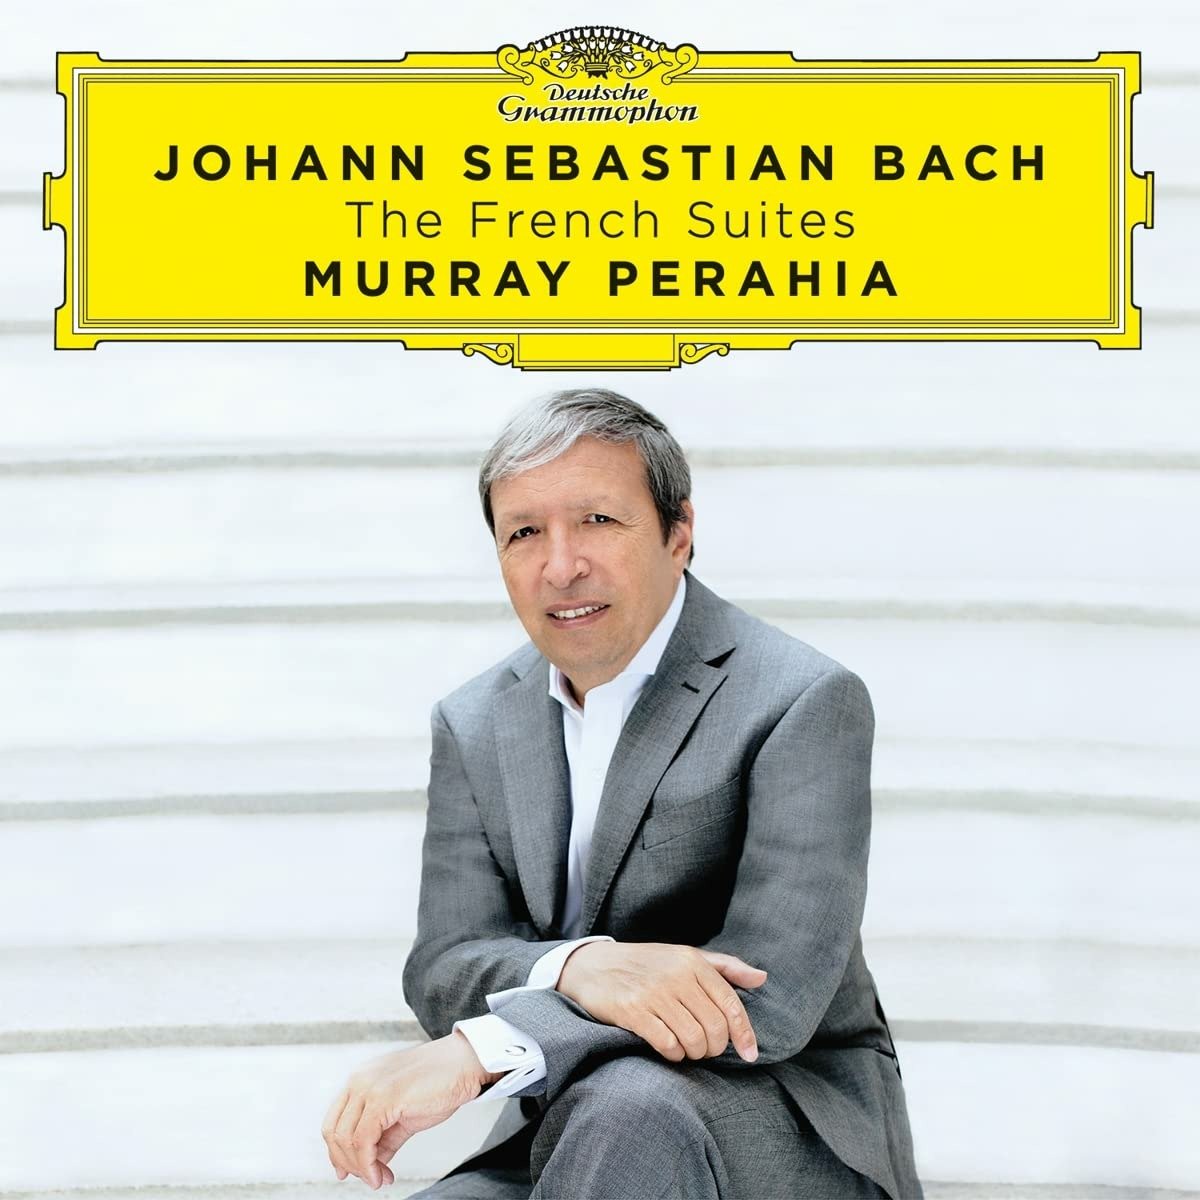 CD Shop - PERAHIA, MURRAY J.S. BACH: THE FRENCH SUITES